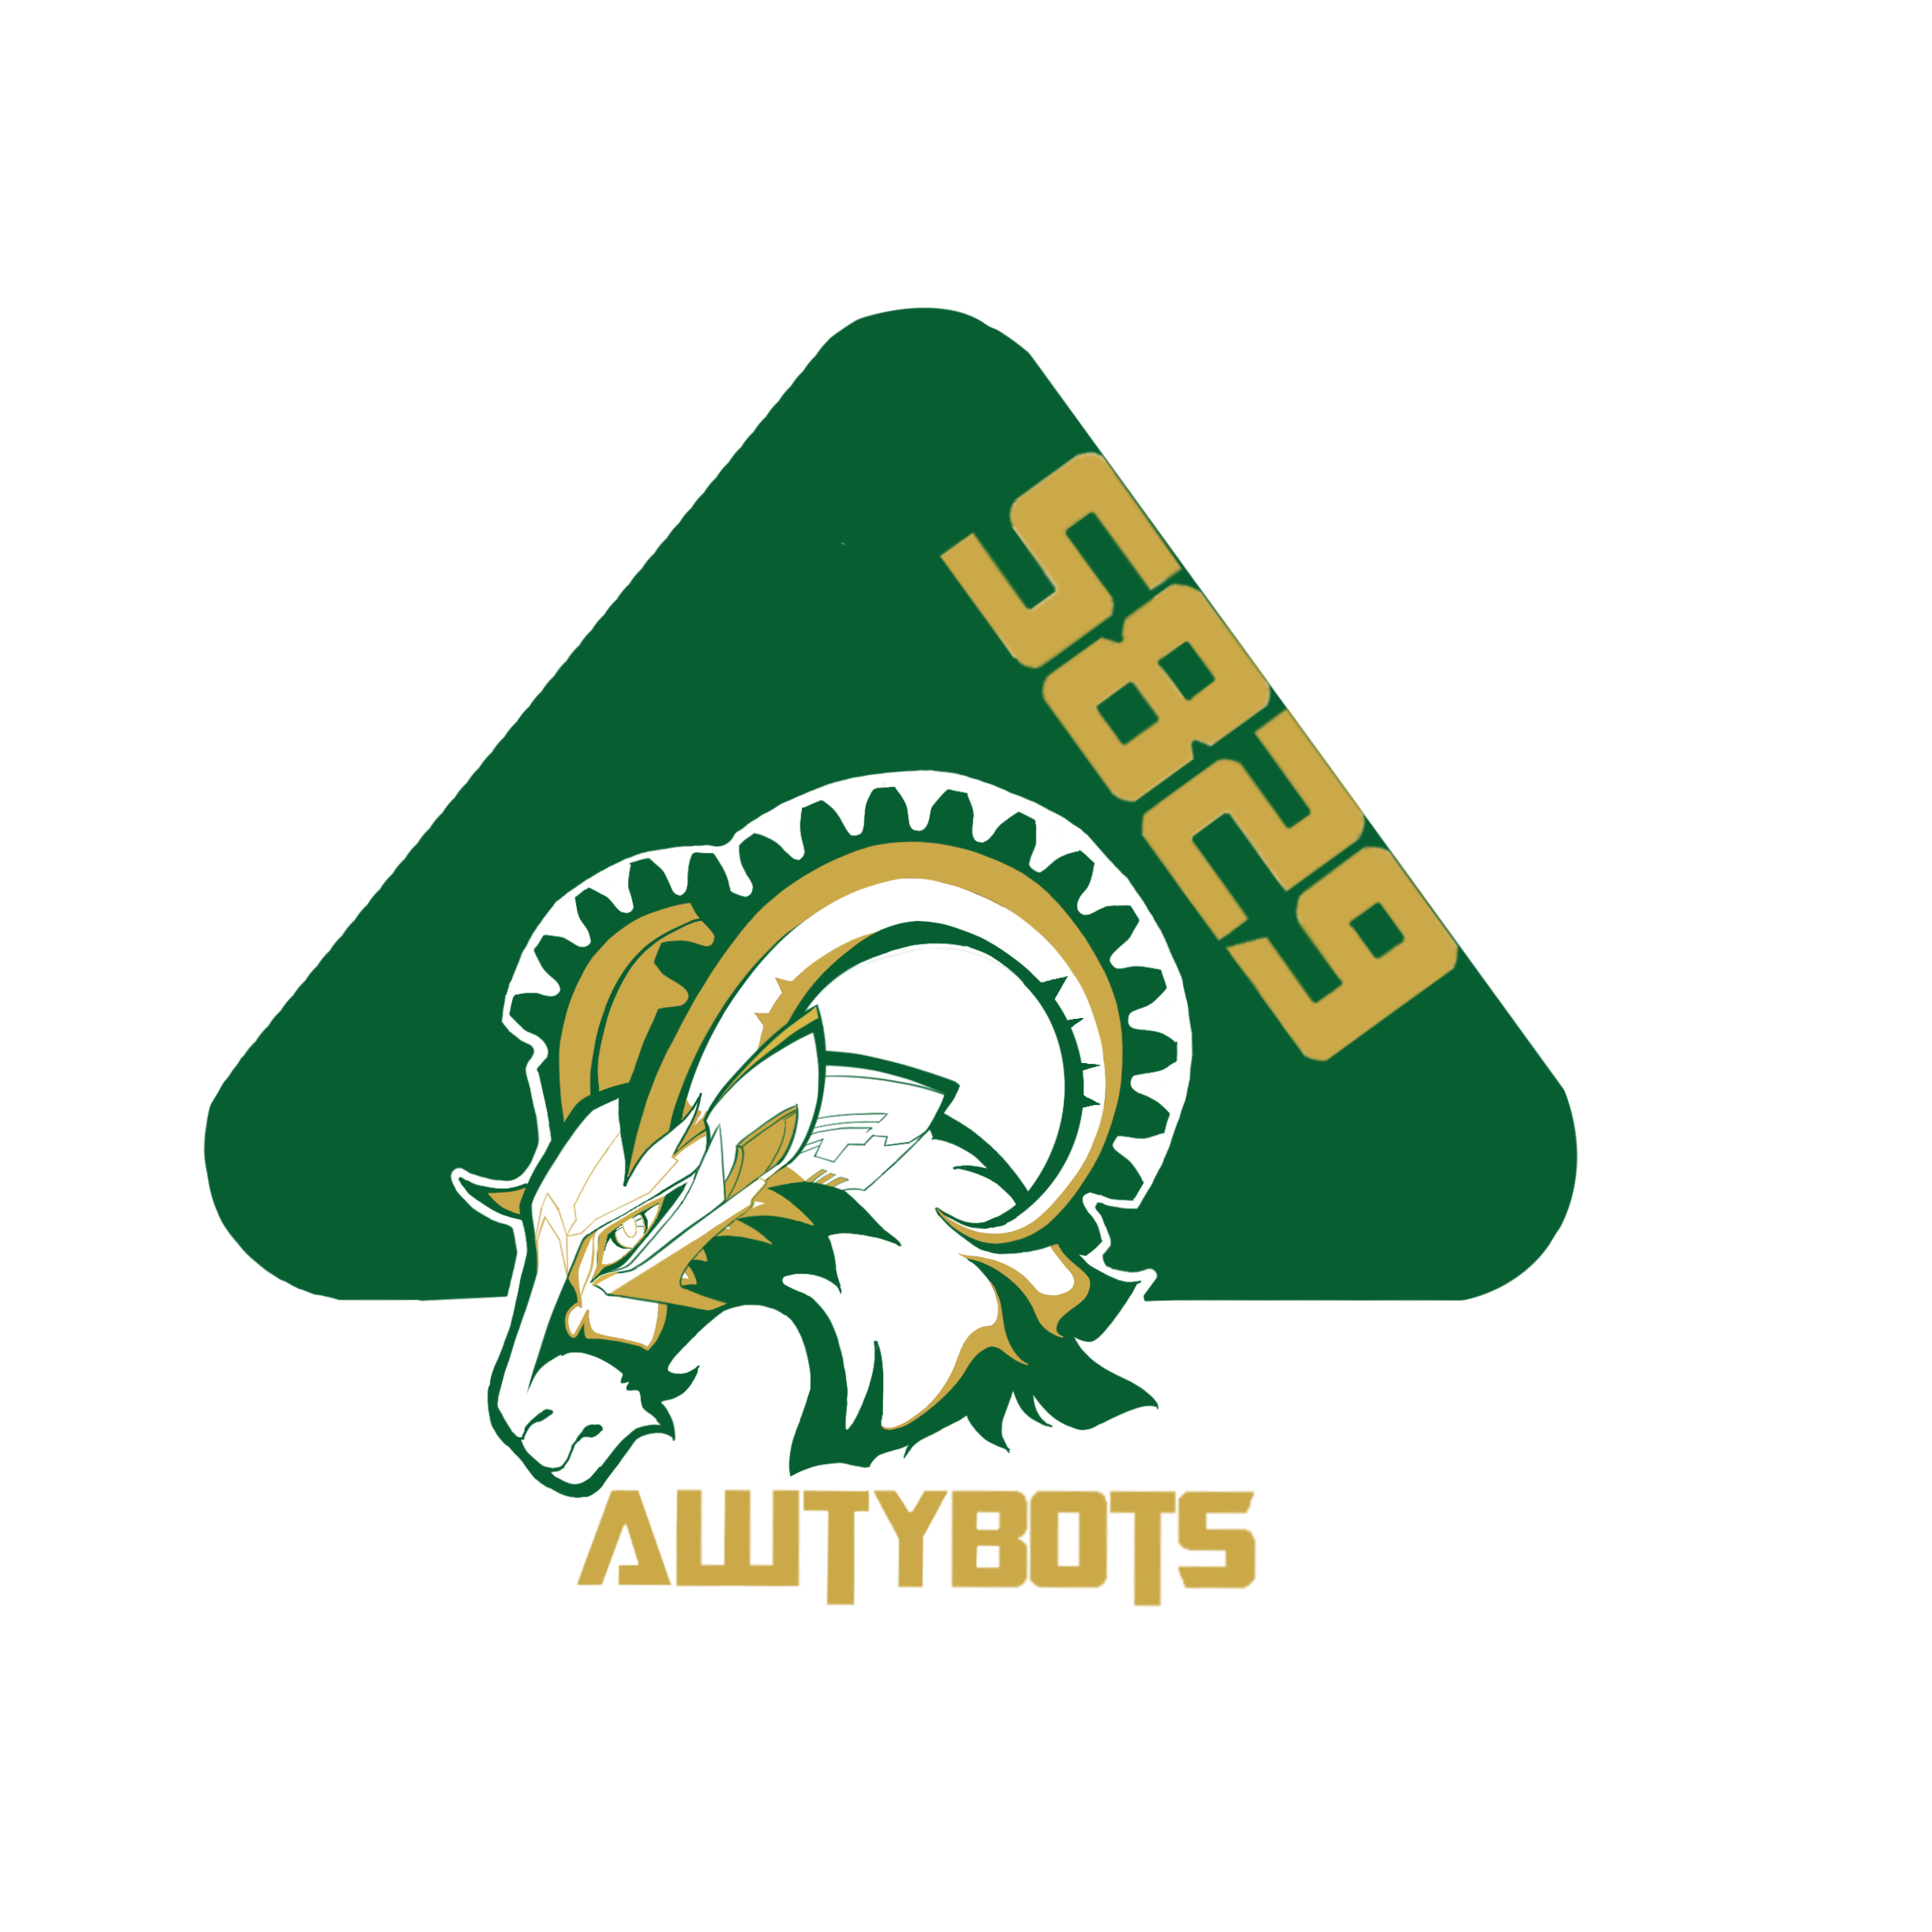 The Awtybots logo. Consists of the green rounded triangle Awty International School logo as a base, the team number 5829 written in golden block letters on the top right side of the triangle, and the Awty Ram mascot integrated into the center and the bottom of the triangle, with gear-like horns. 'Awtybots' is also written along the bottom in gold text.